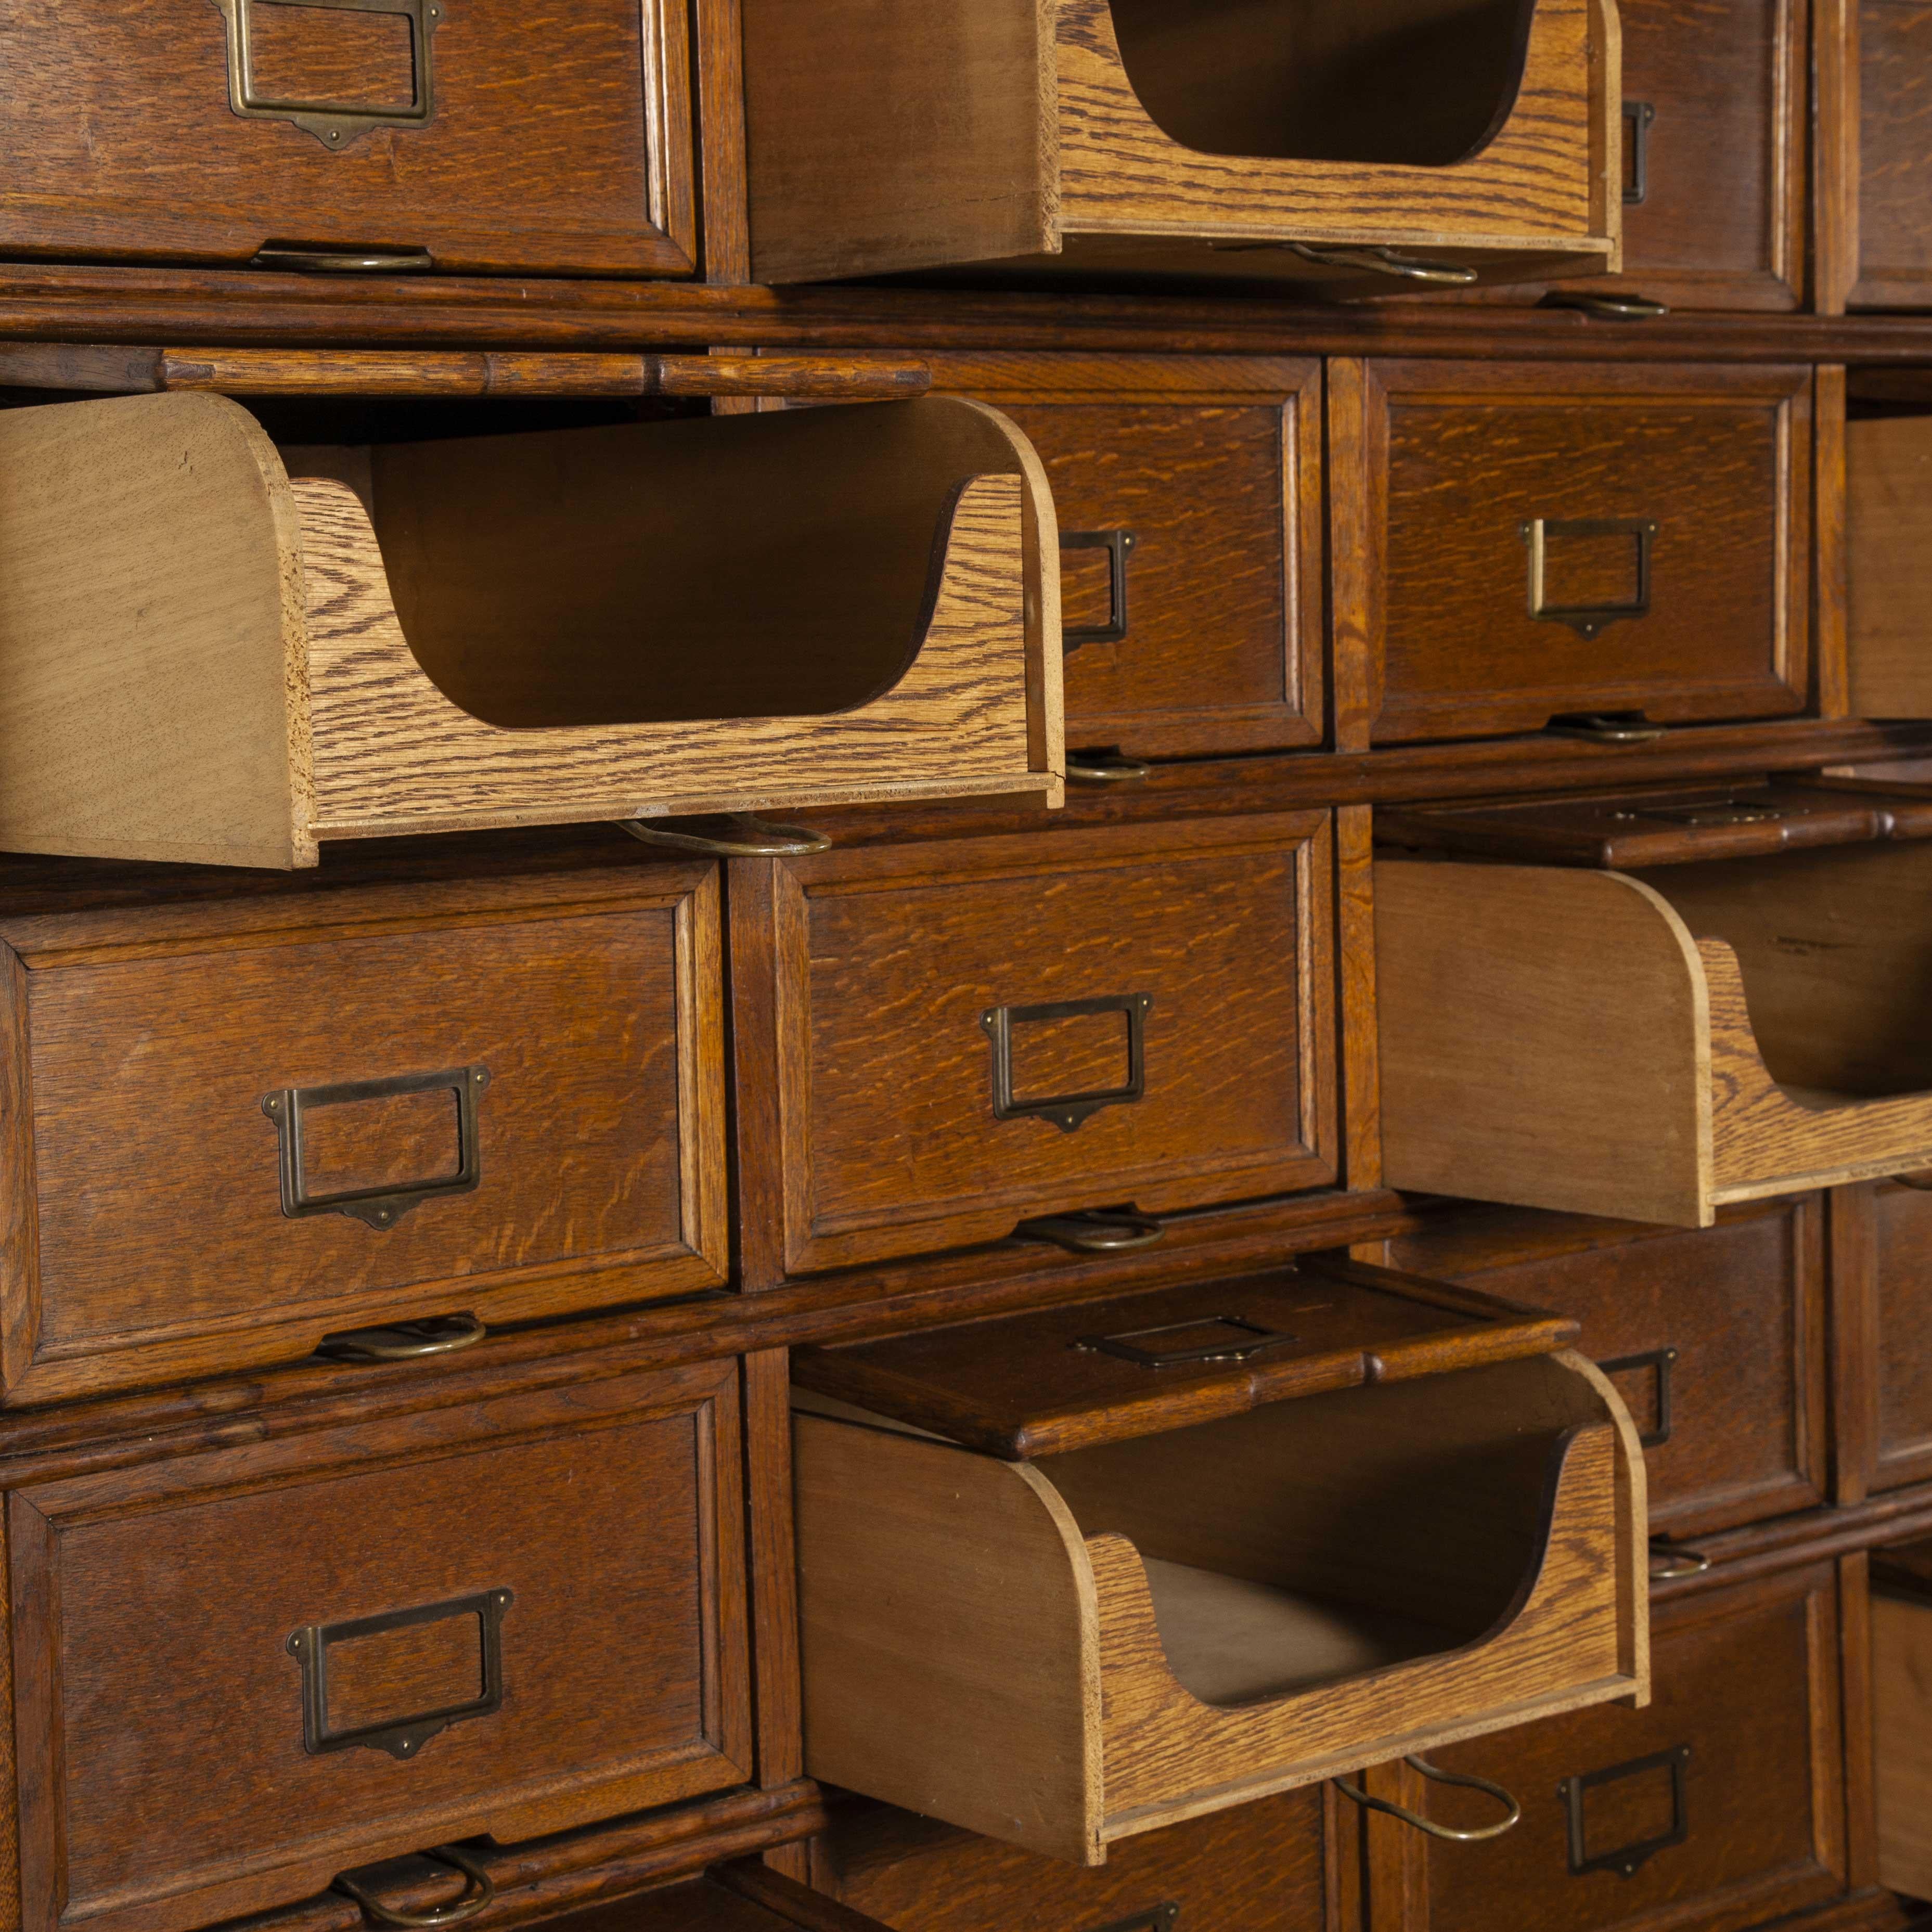 1930s large tall multi drawer Stolzenberg Atelier cabinet – Forty drawers

1930s large tall multi drawer Stolzenberg atelier cabinet – forty drawers. Stolzenberg was founded in 1898 in Baden-Ooos, now called Baden Baden, in southern Germany.